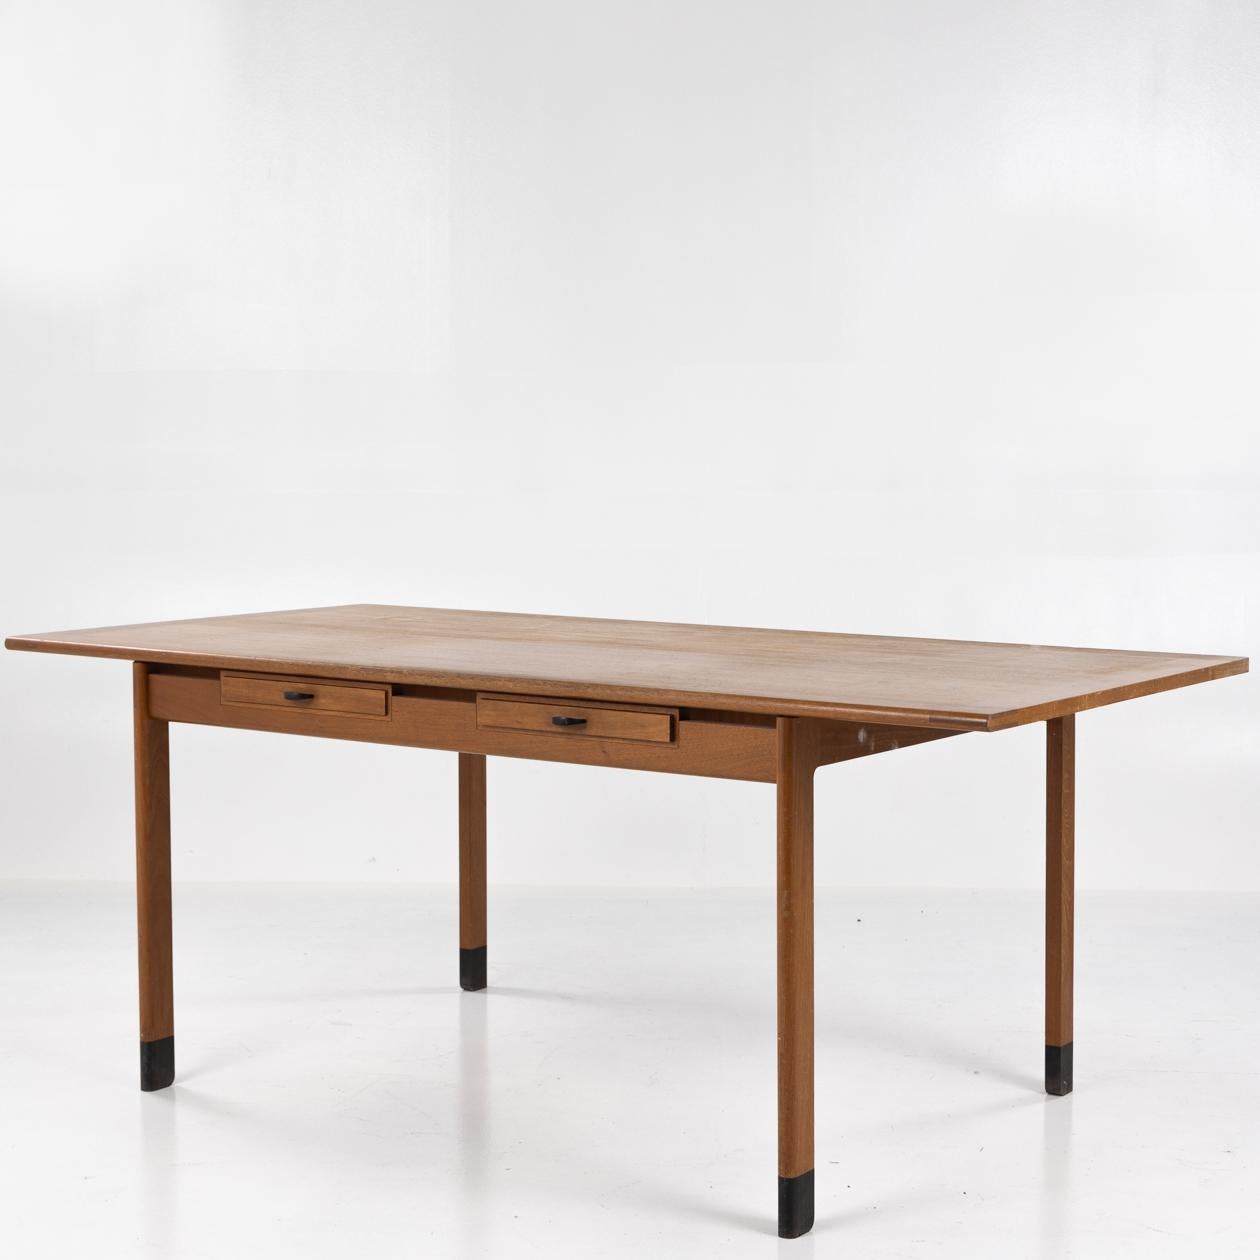 Rare desk in mahogany with two drawers and feet. Designed in 1958 by Vilhelm Wohlert for cabinetmaker Arne Poulsen.

NOTE: Restoration of the desk is included within the price.

